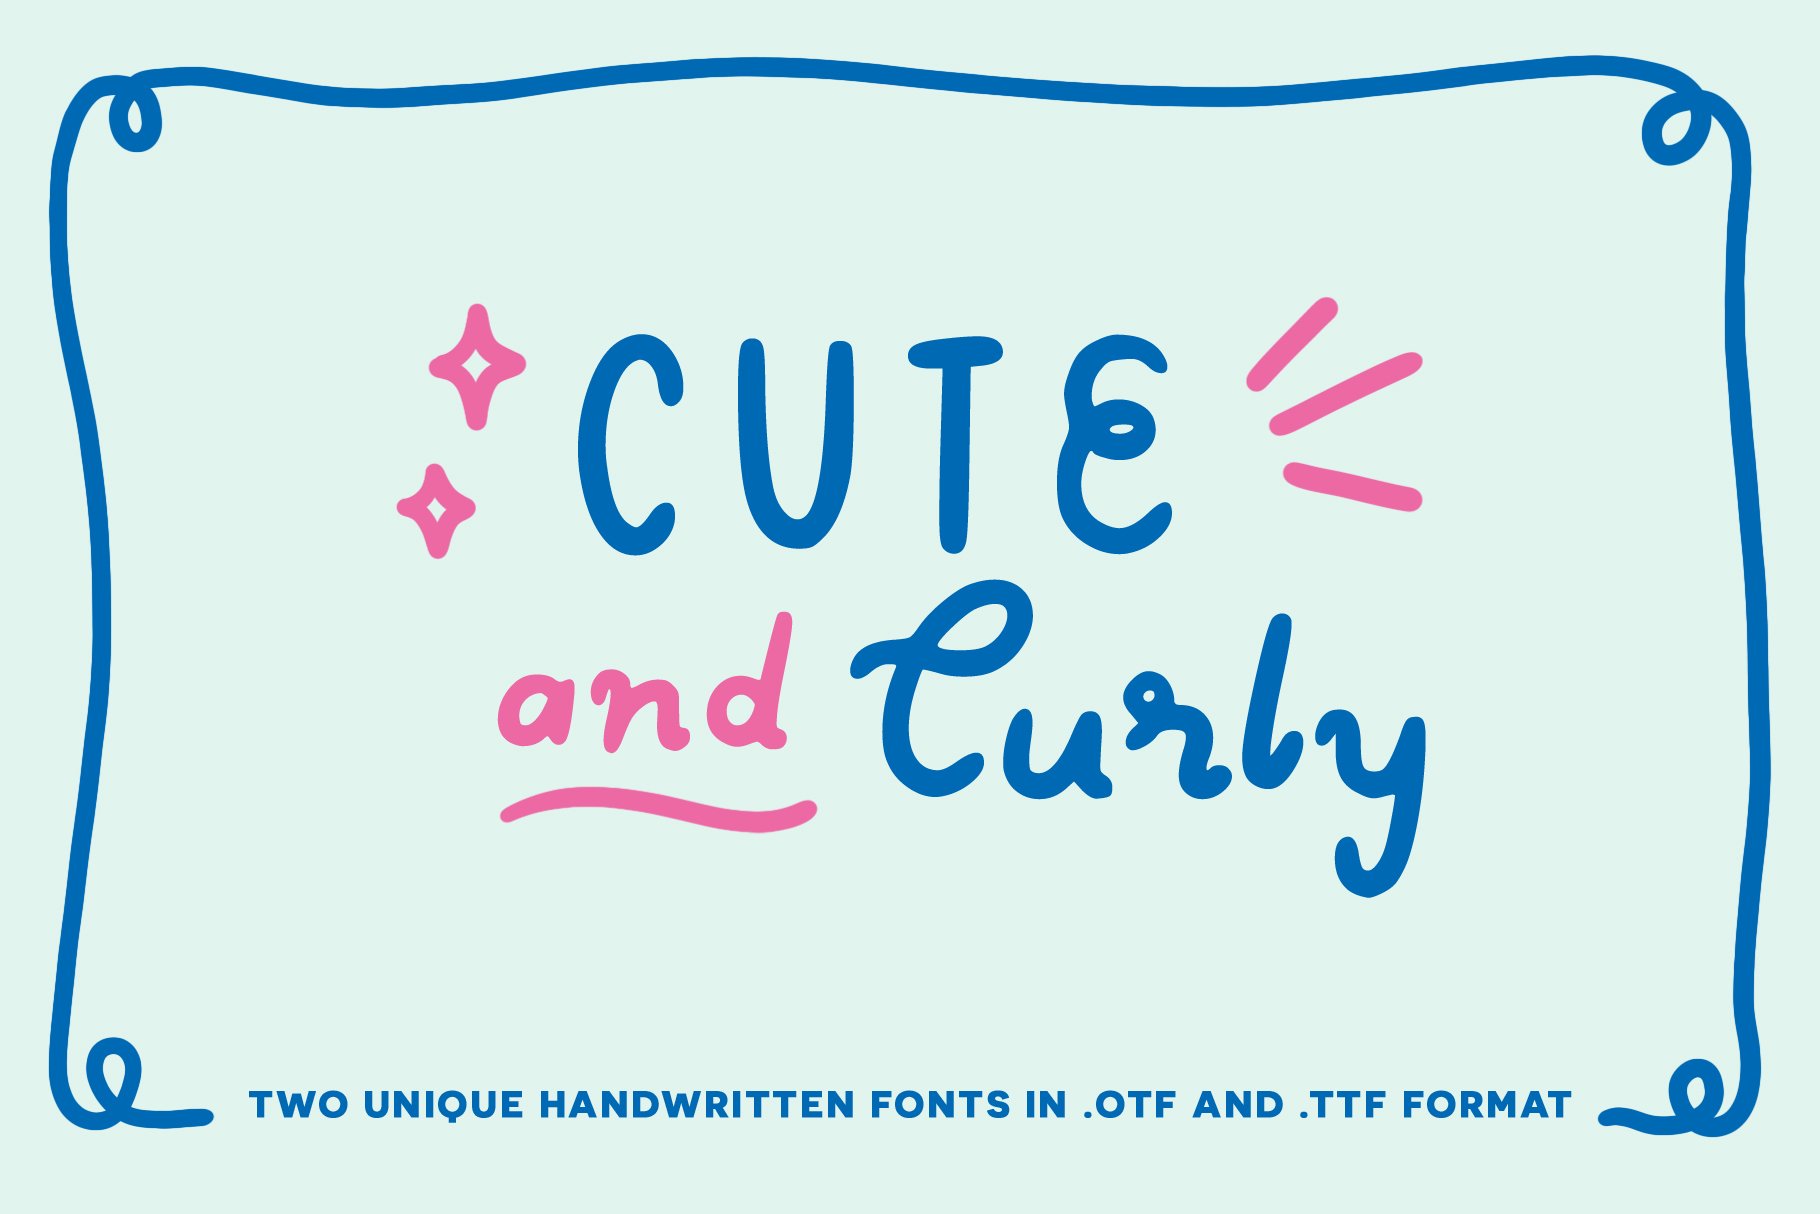 Cute & Curly handwritten fonts cover image.